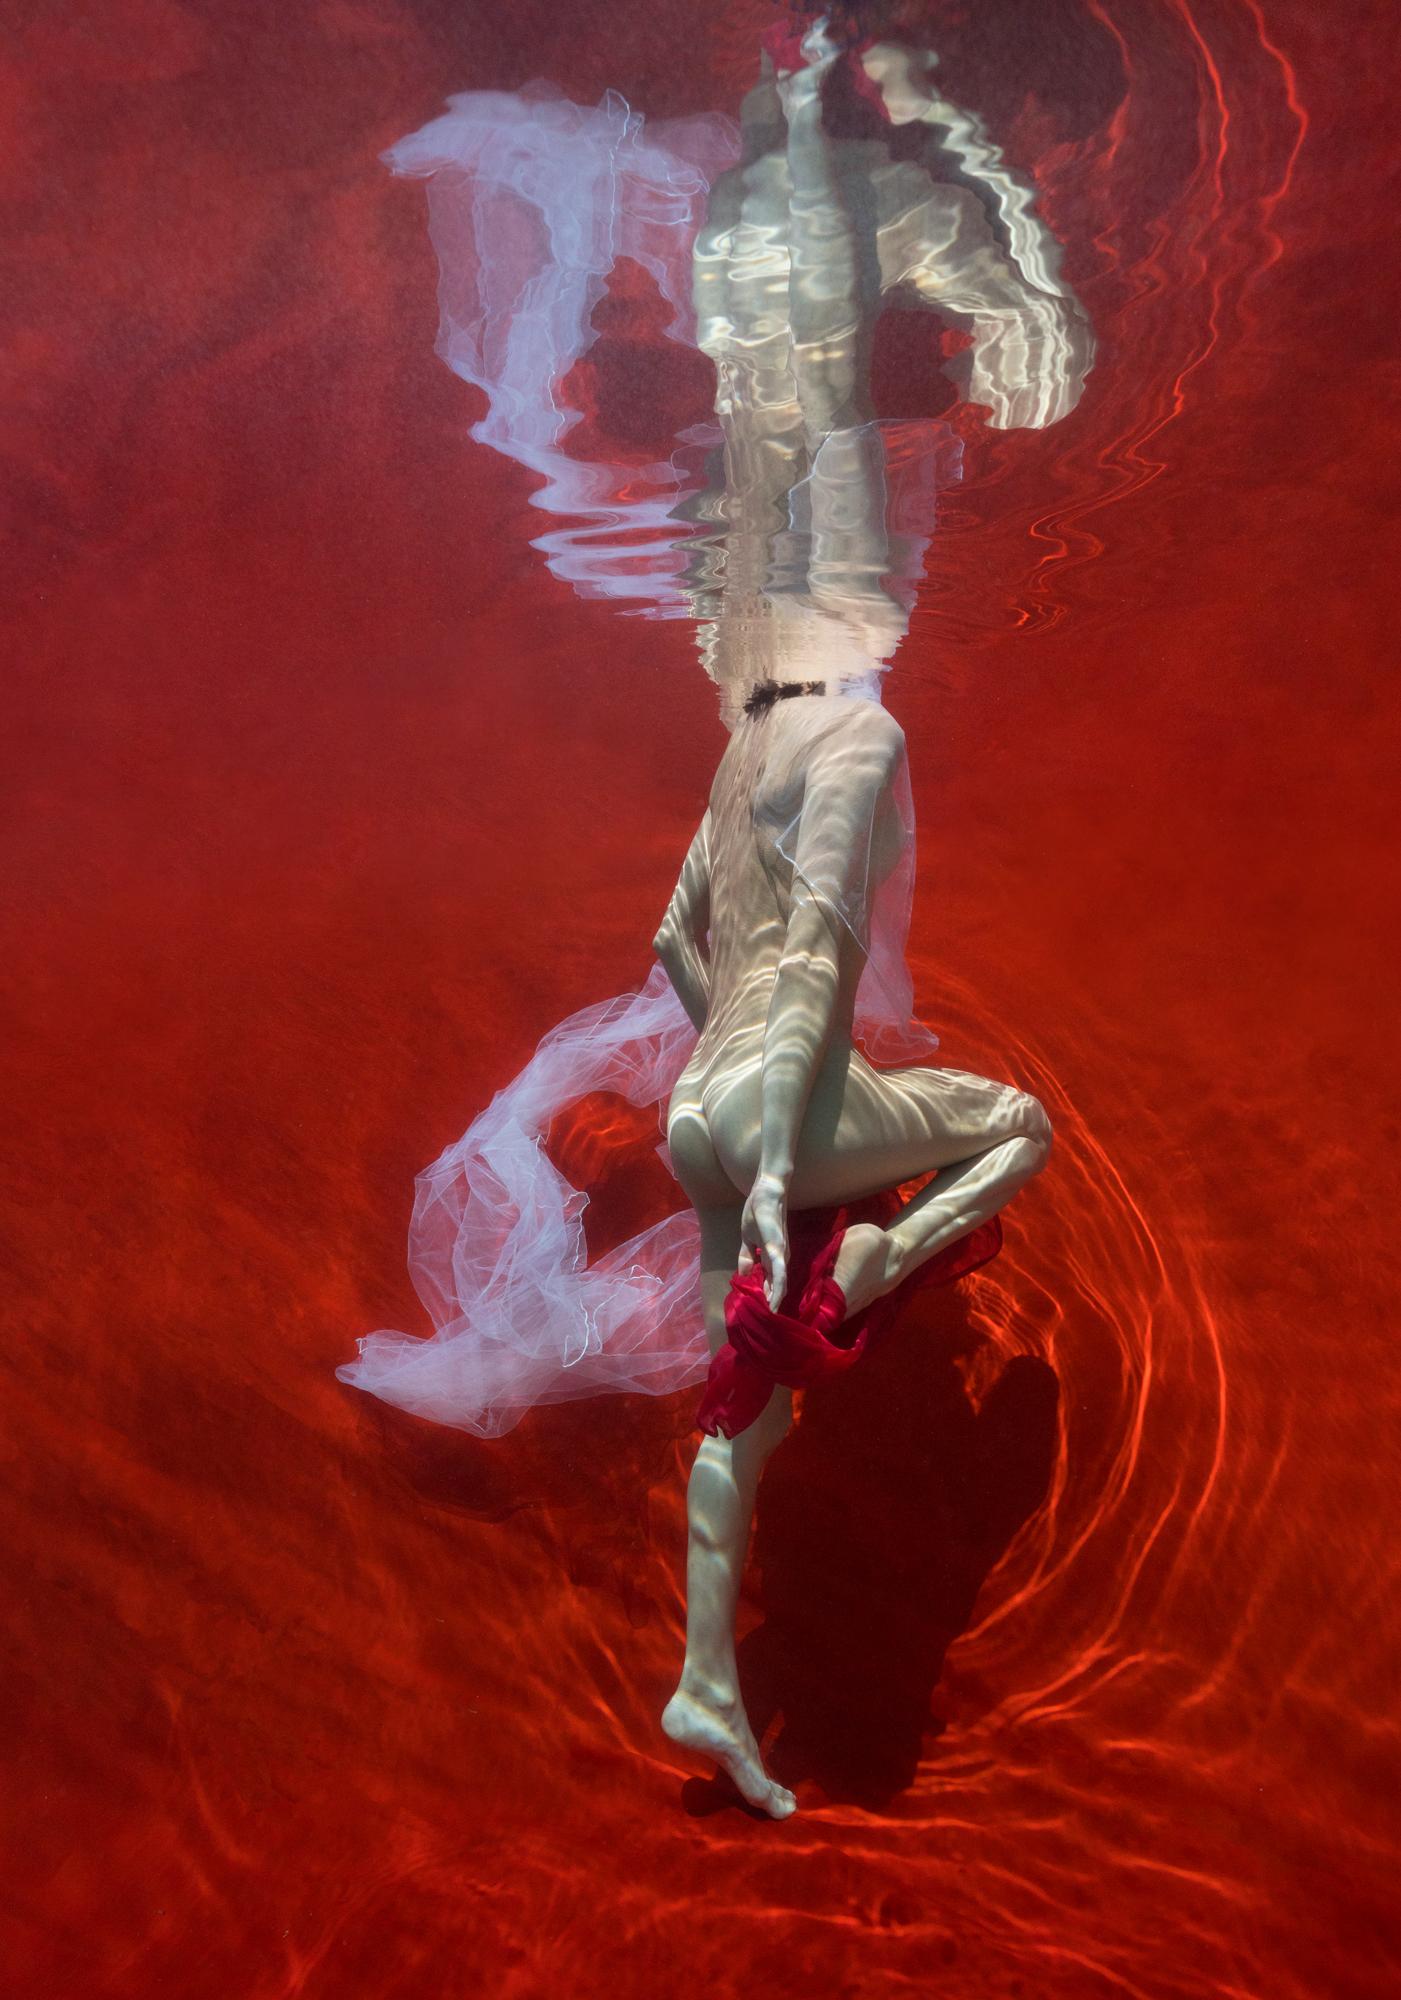 Blood and Milk VII  - underwater nude photograph - print on aluminum 36" x 24"